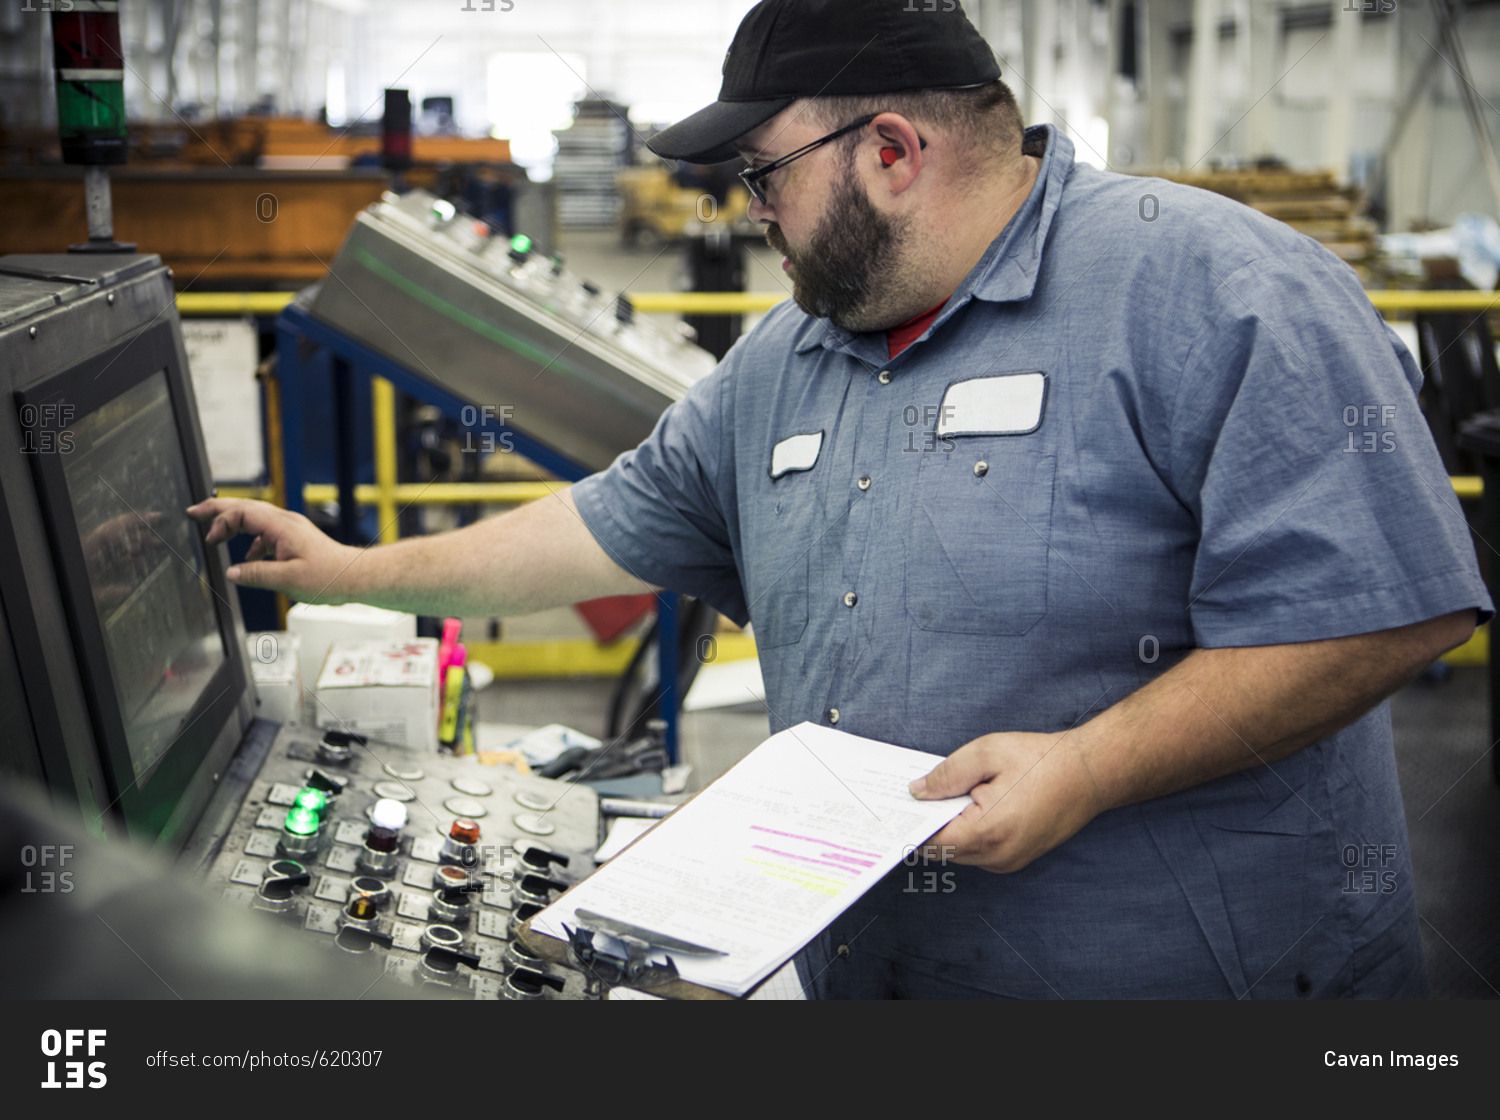 Overweight manual worker operating machinery at control panel in metal industry